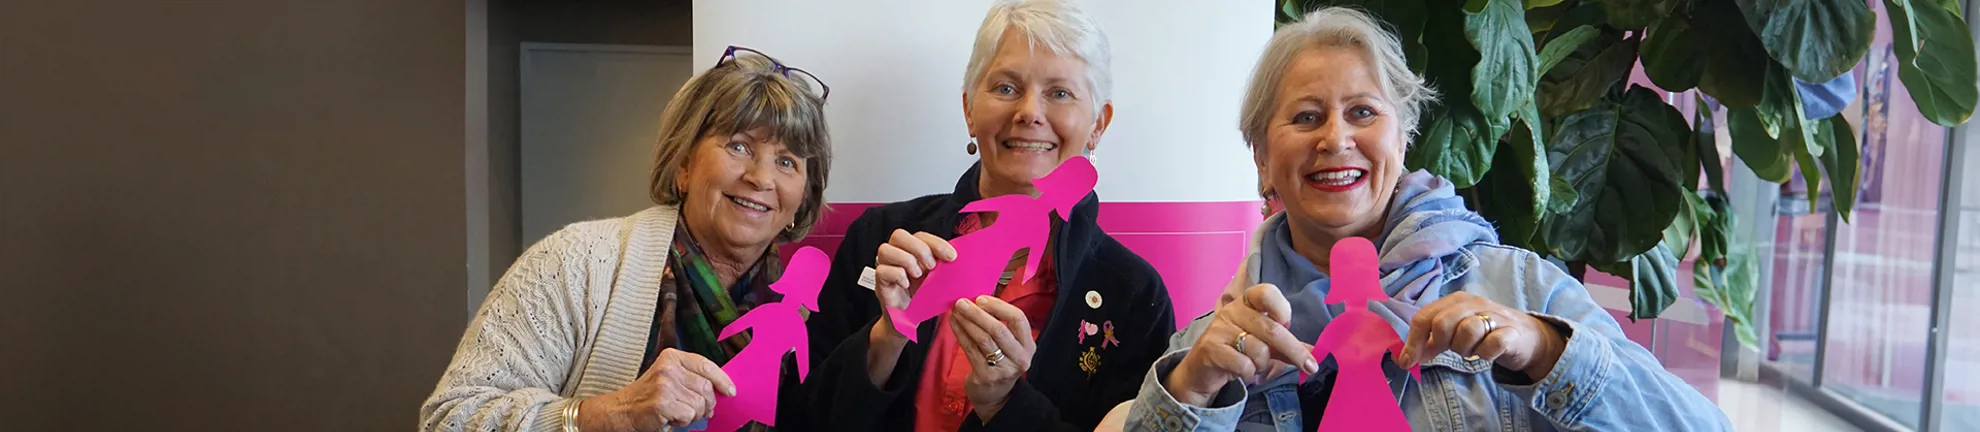 Three women are sitting next to each other holding BCNA pink lady silhouettes and smiling at the camera